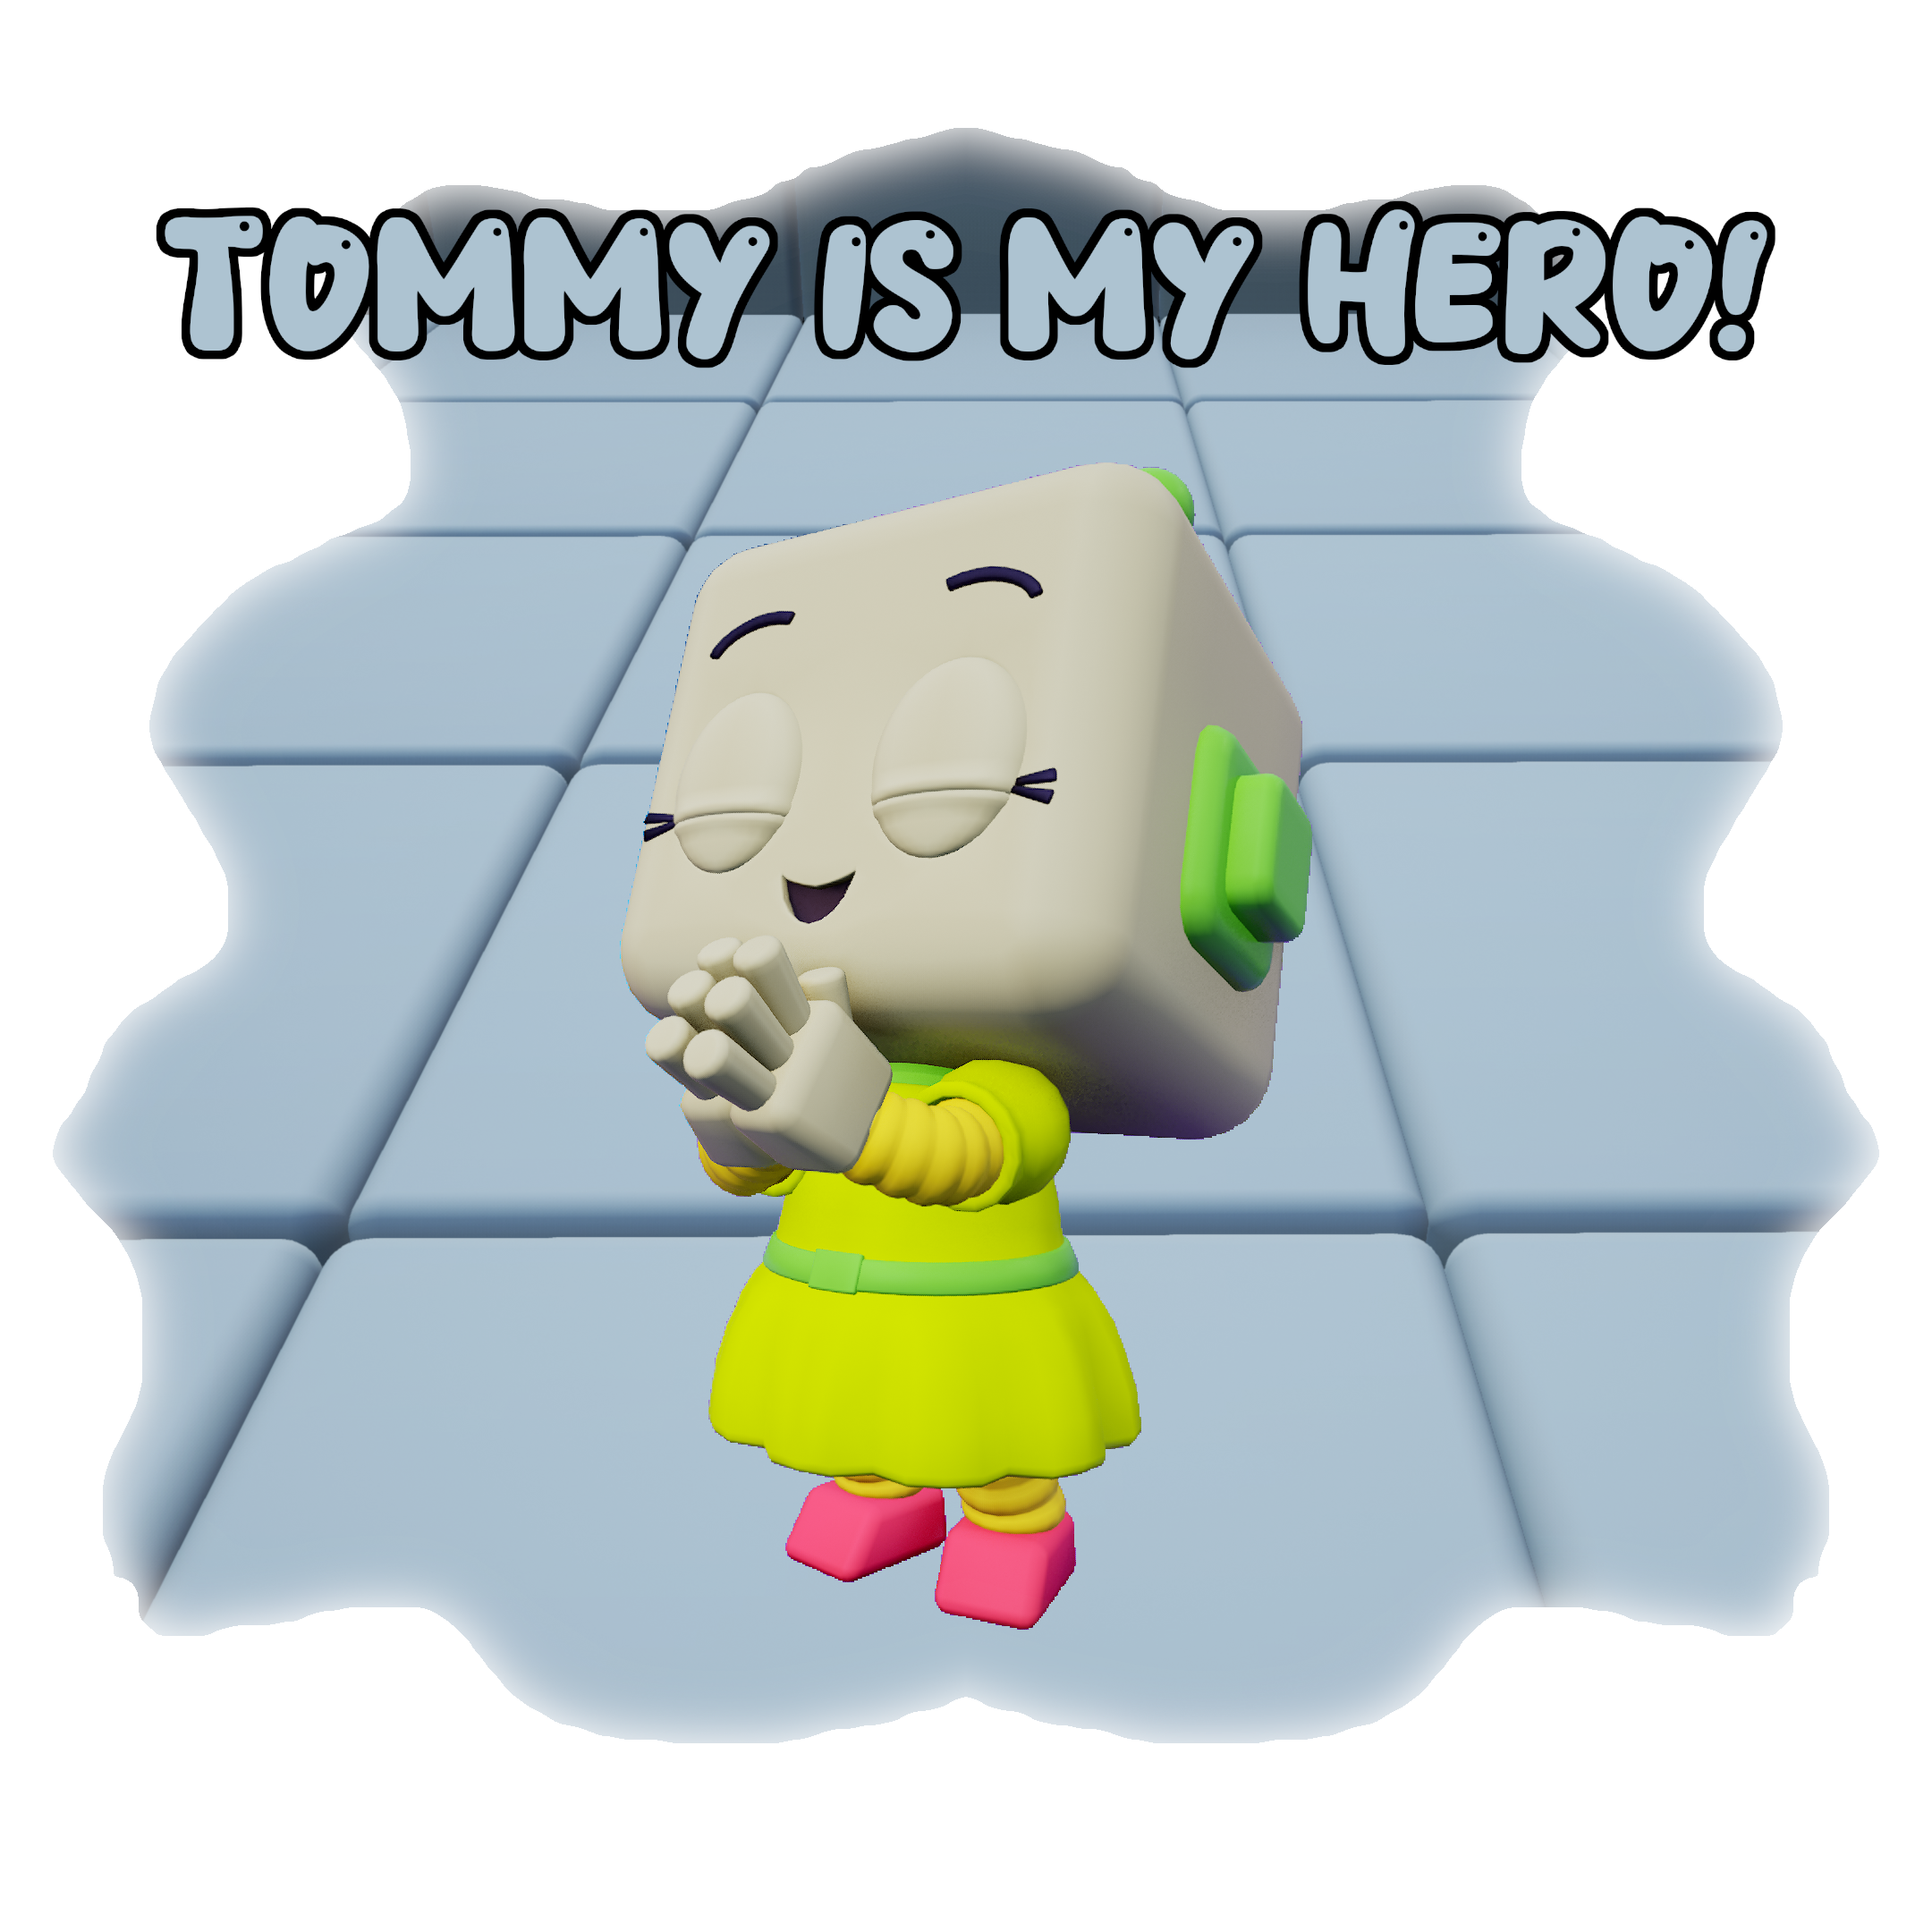 Tommy is my hero!